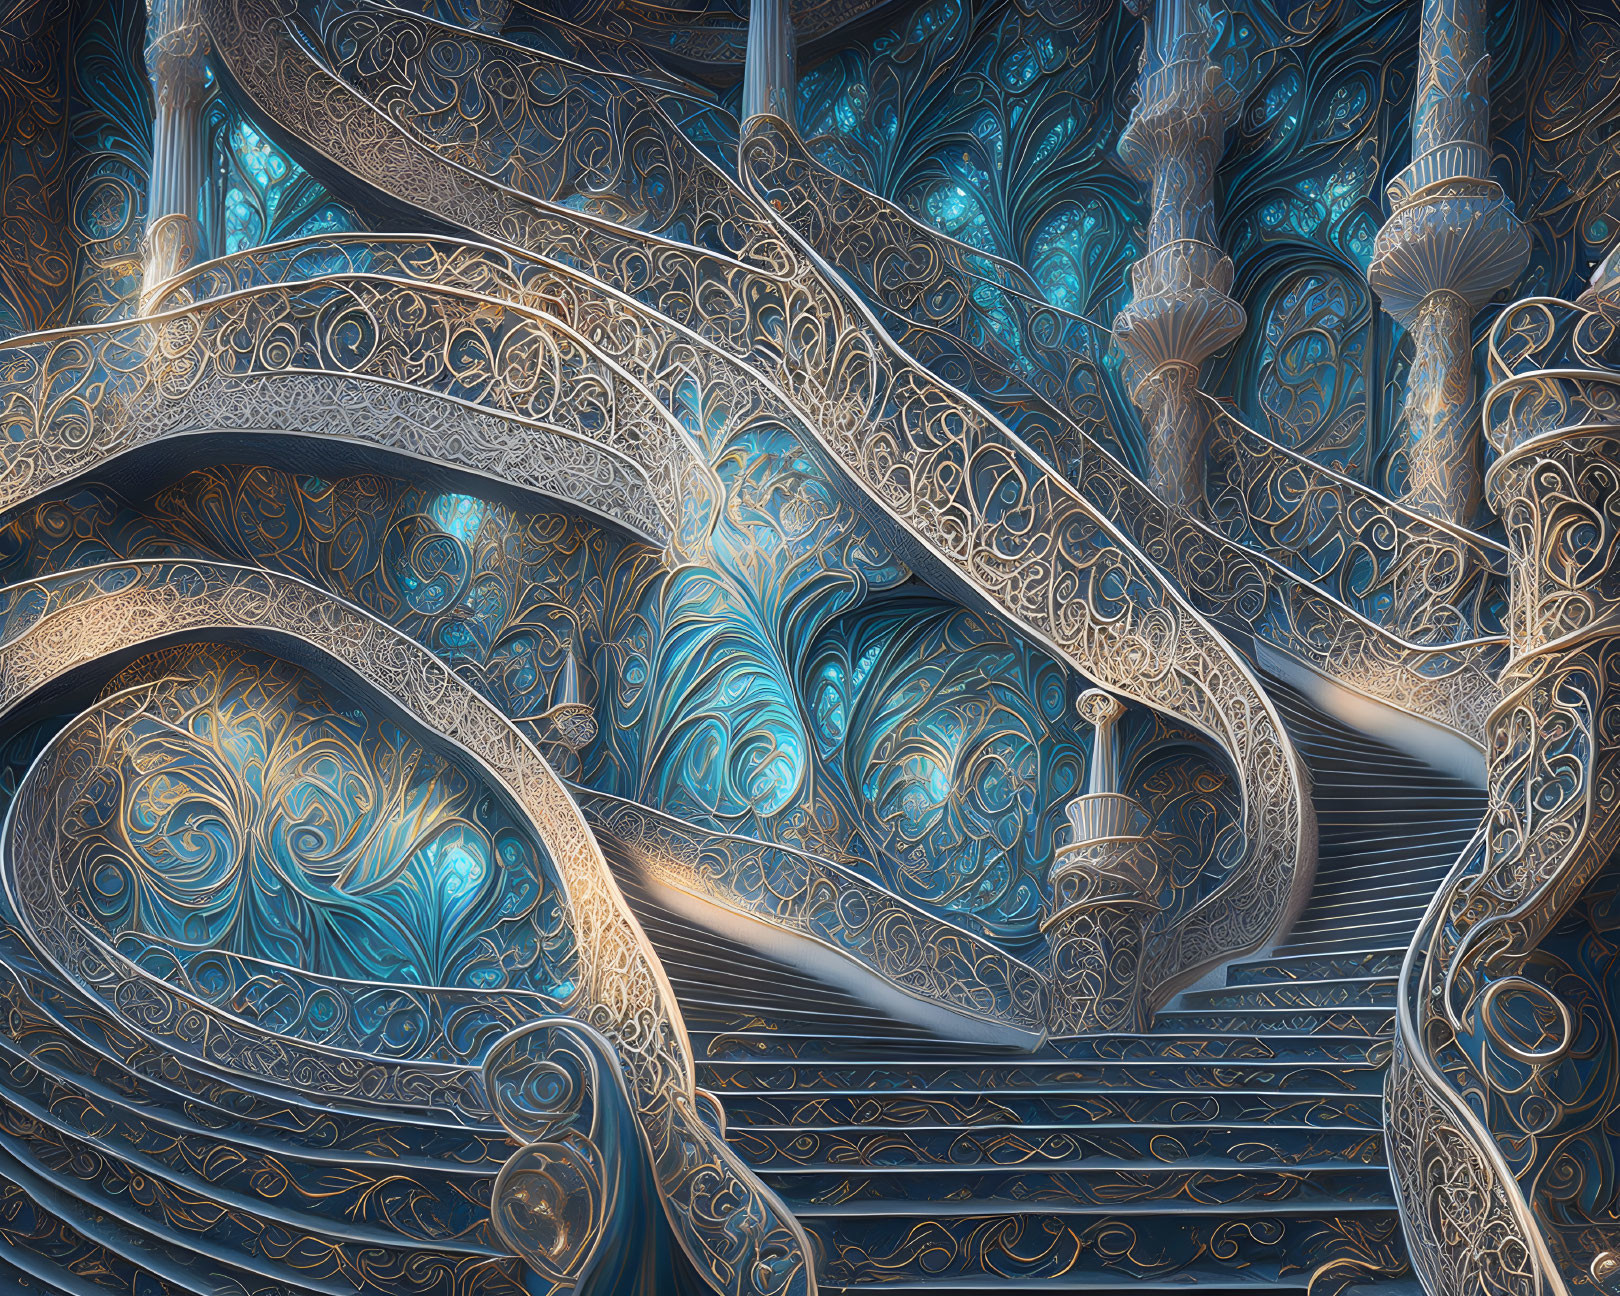 Intricate fractal image: Ornate blue and gold staircases